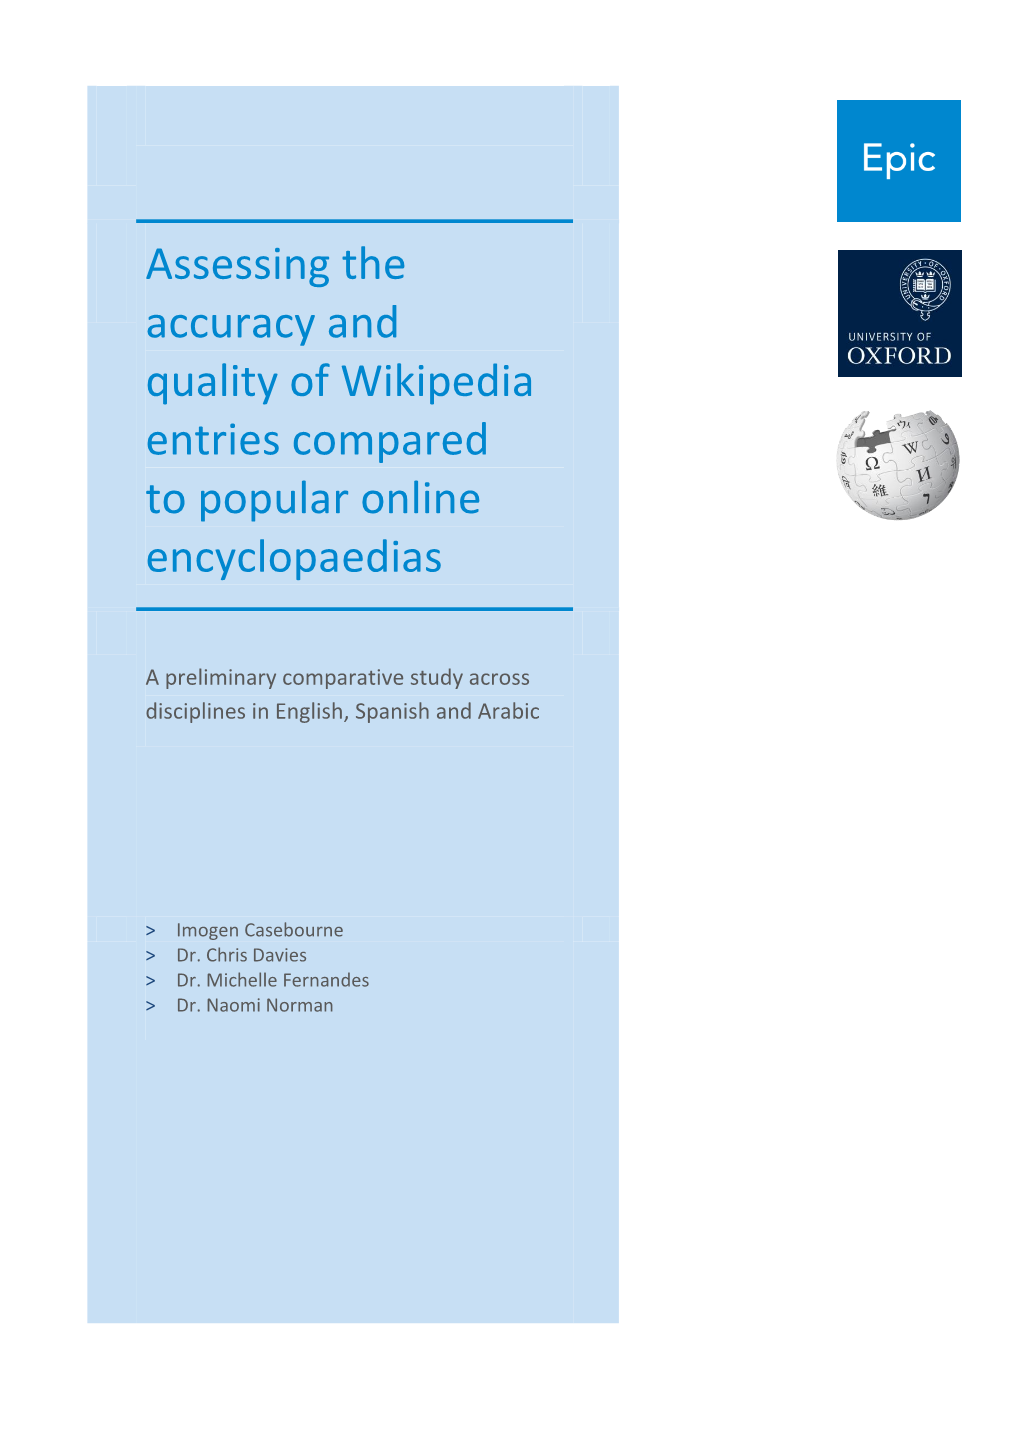 Assessing the Accuracy and Quality of Wikipedia Entries Compared to Popular Online Encyclopaedias